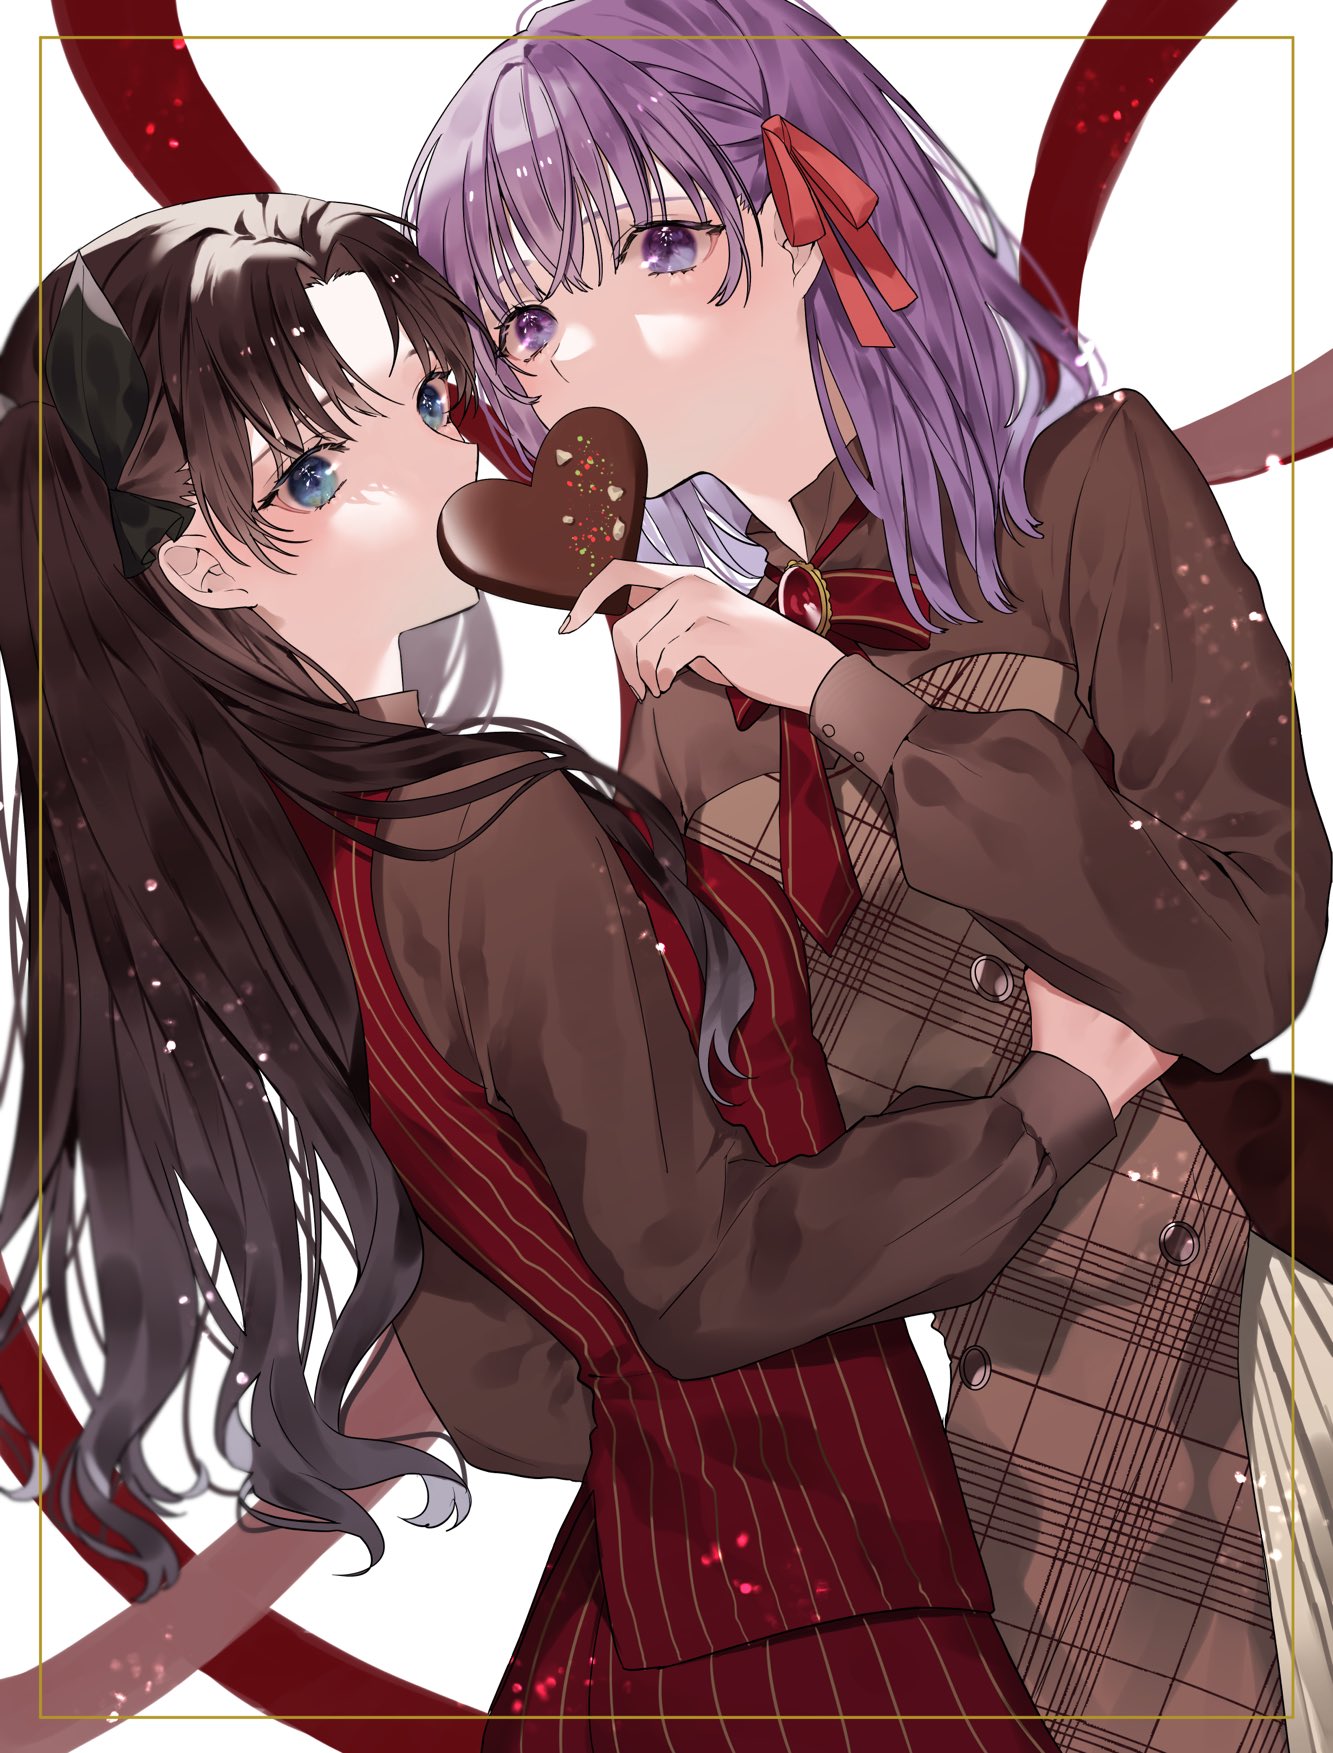 2girls apron bangs black_hair black_ribbon blue_eyes brown_shirt candy chocolate covered_mouth fate/stay_night fate_(series) food hair_ribbon heart heart-shaped_chocolate highres holding holding_chocolate holding_food hug long_hair looking_at_viewer looking_to_the_side matou_sakura multiple_girls purple_hair red_ribbon ribbon shimatori_(sanyyyy) shirt tohsaka_rin twintails valentine violet_eyes white_background